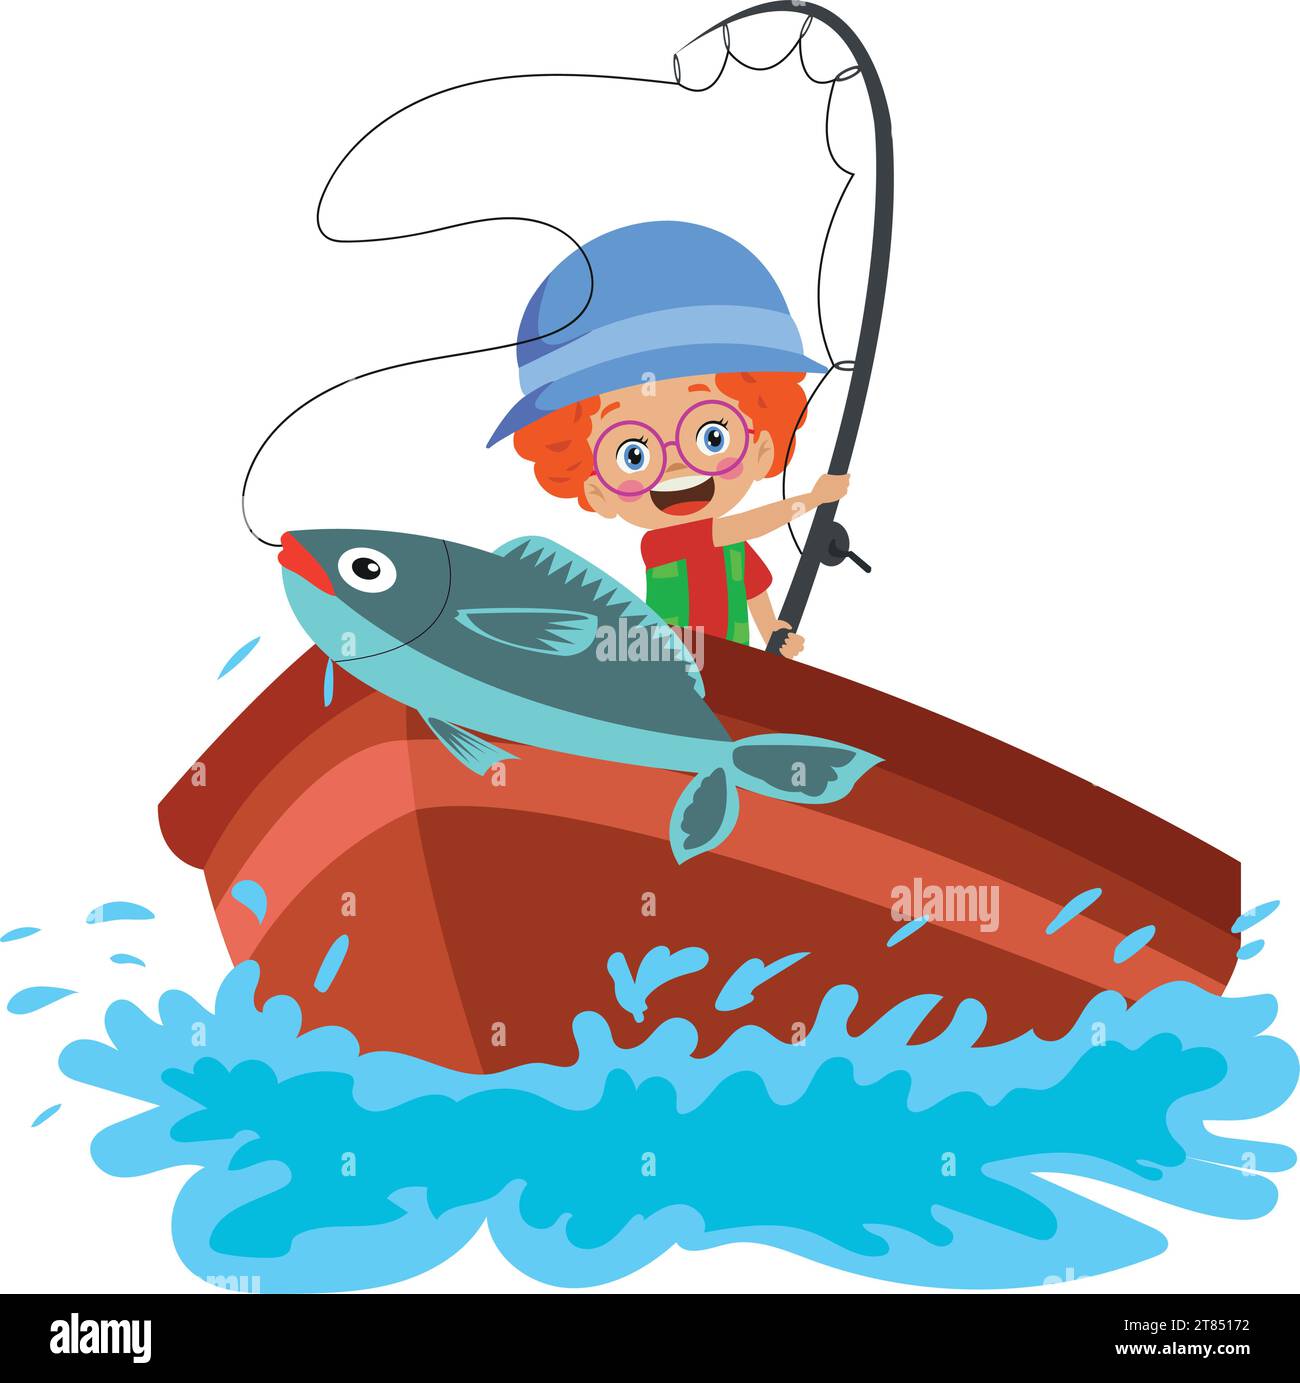 Cute Little Boy Fisherman with Fishing Rod in Hands To Fish in Water,  Summer Leisure of Young Happy Fisher Character Stock Vector - Illustration  of leisure, activity: 275392572